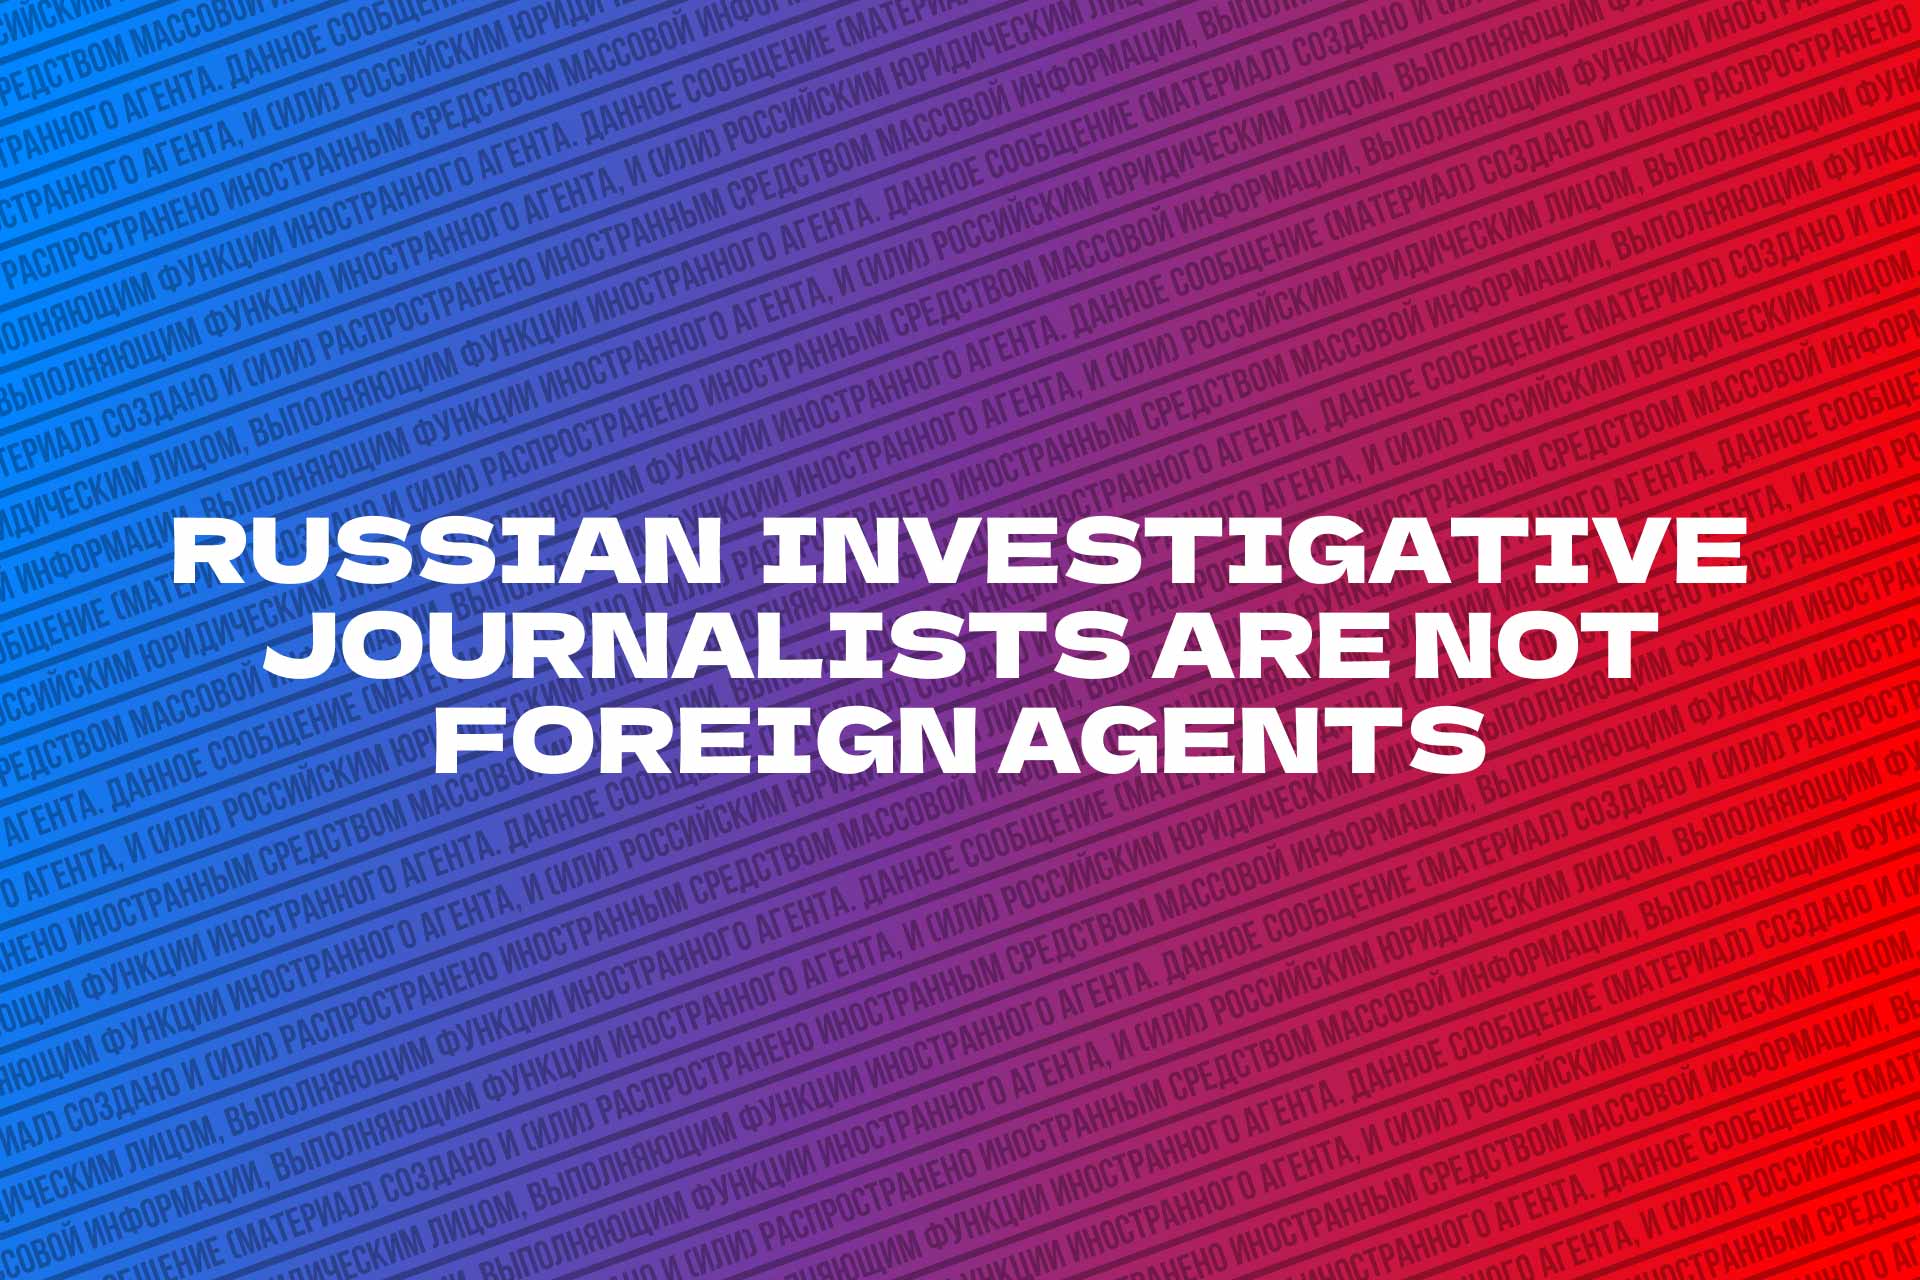 Why Russian Journalists Are Being Branded ‘Foreign Agents’ — And Why It Matters